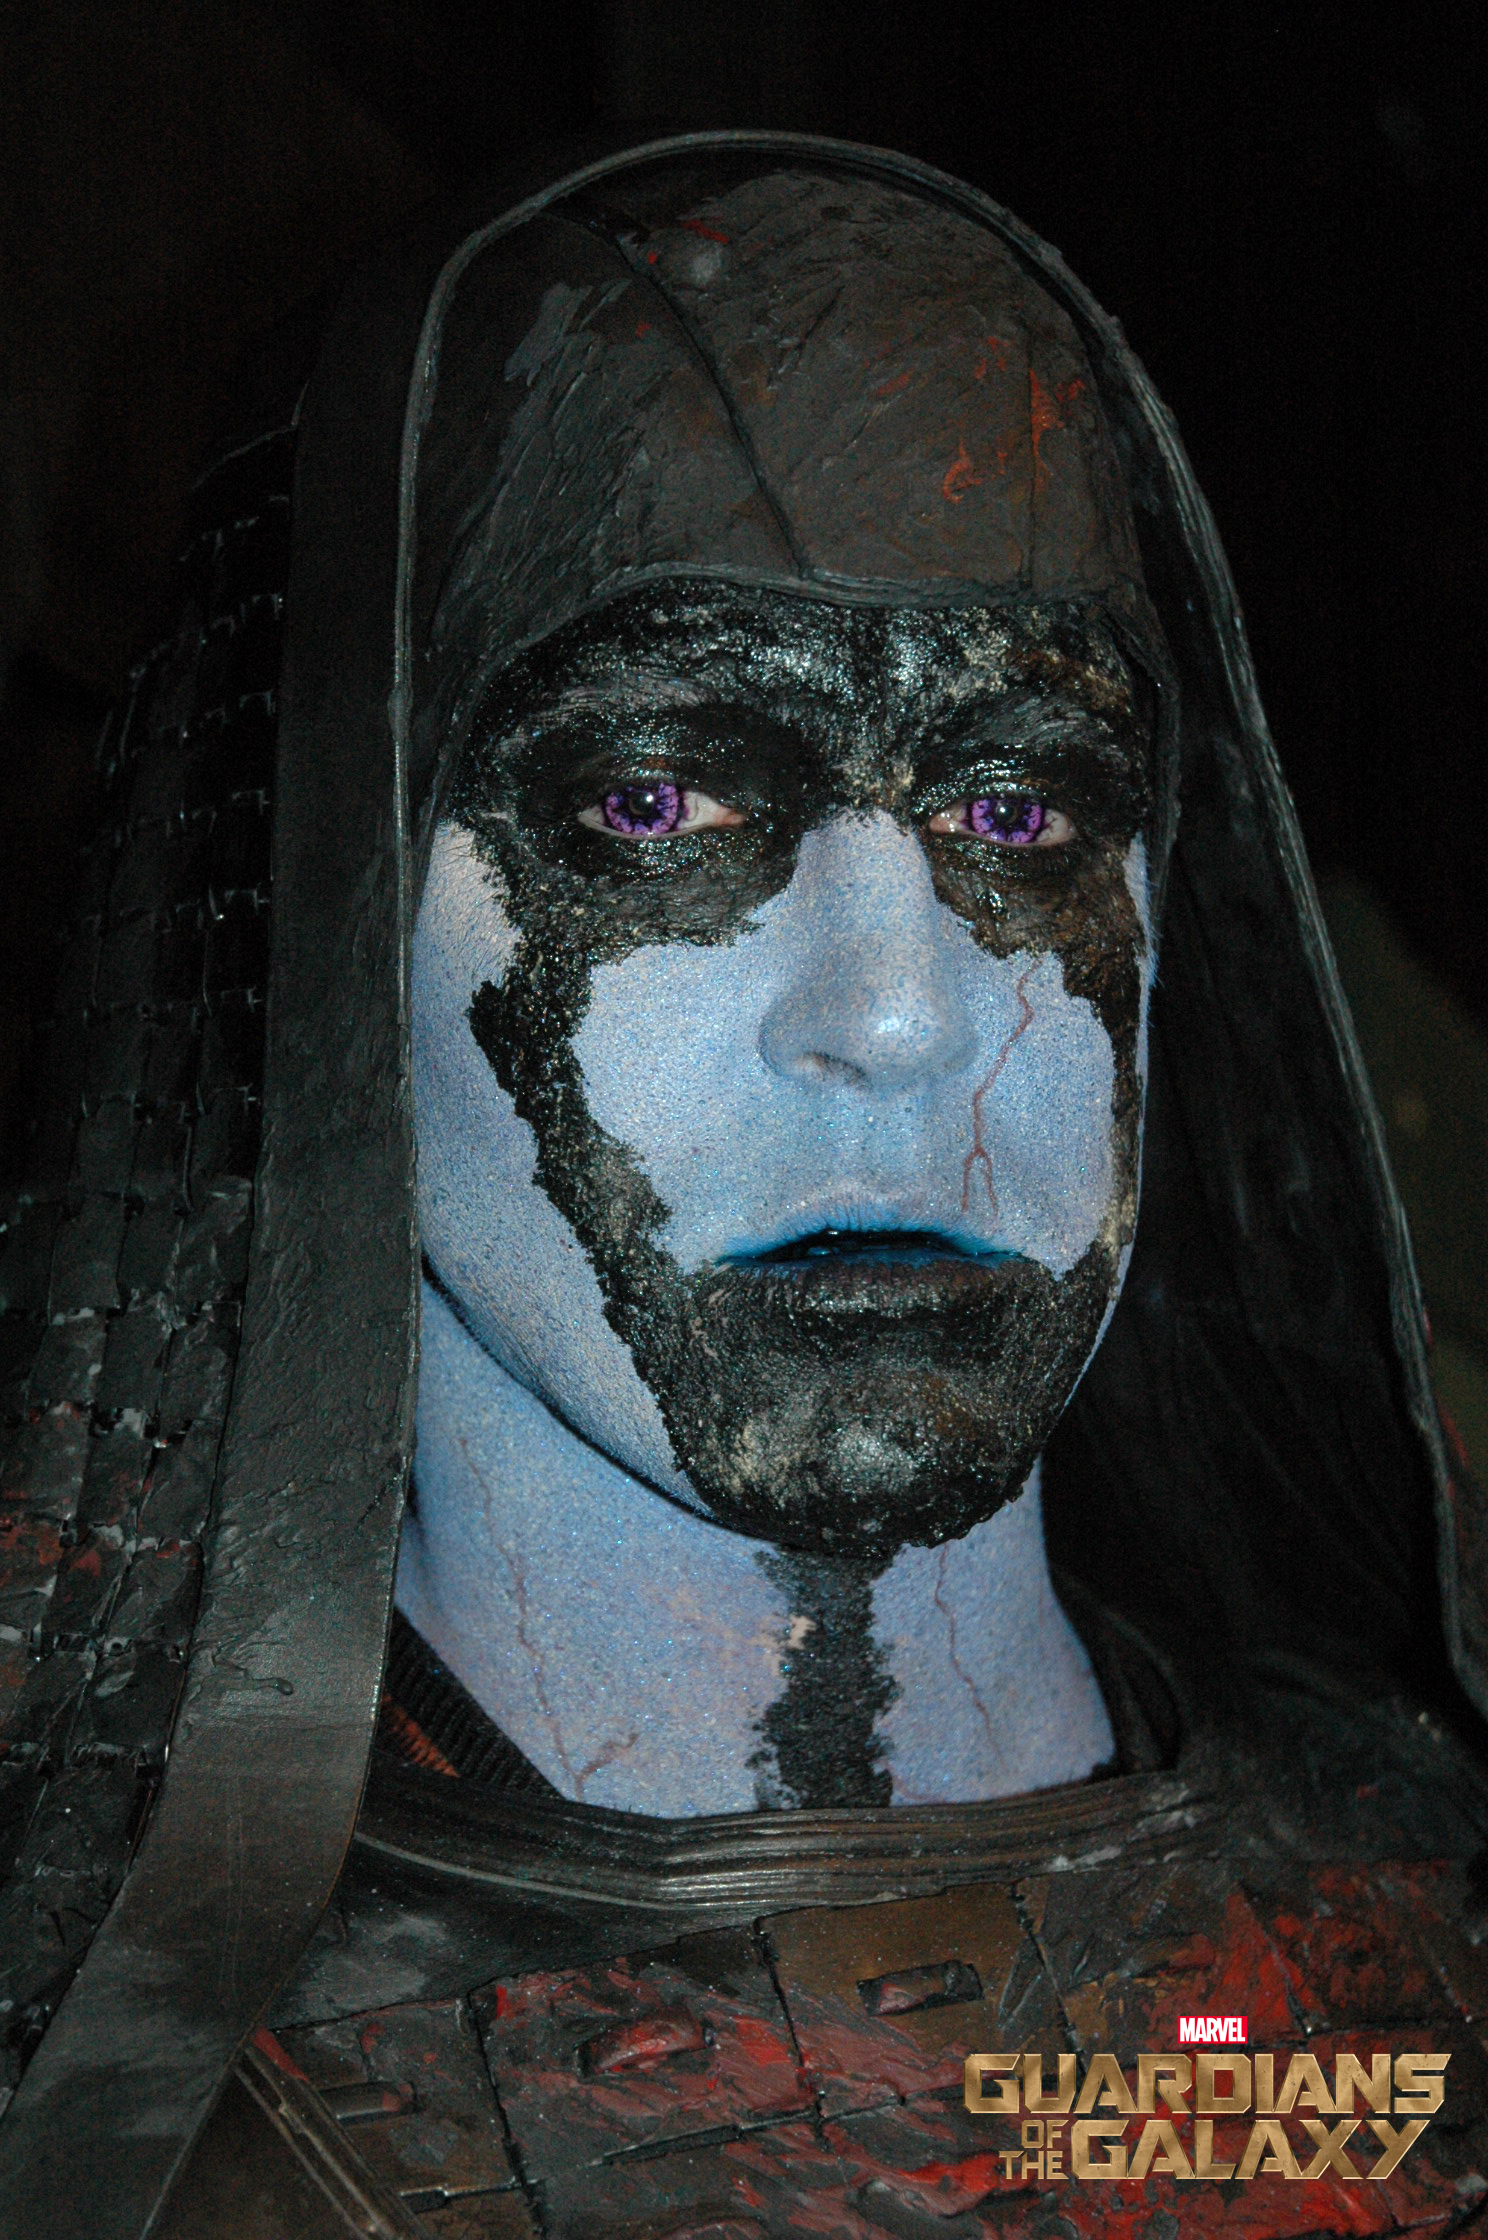 Lee Pace as Ronan in his 3rd & final stage of Make-up for Guardians of the Galaxy